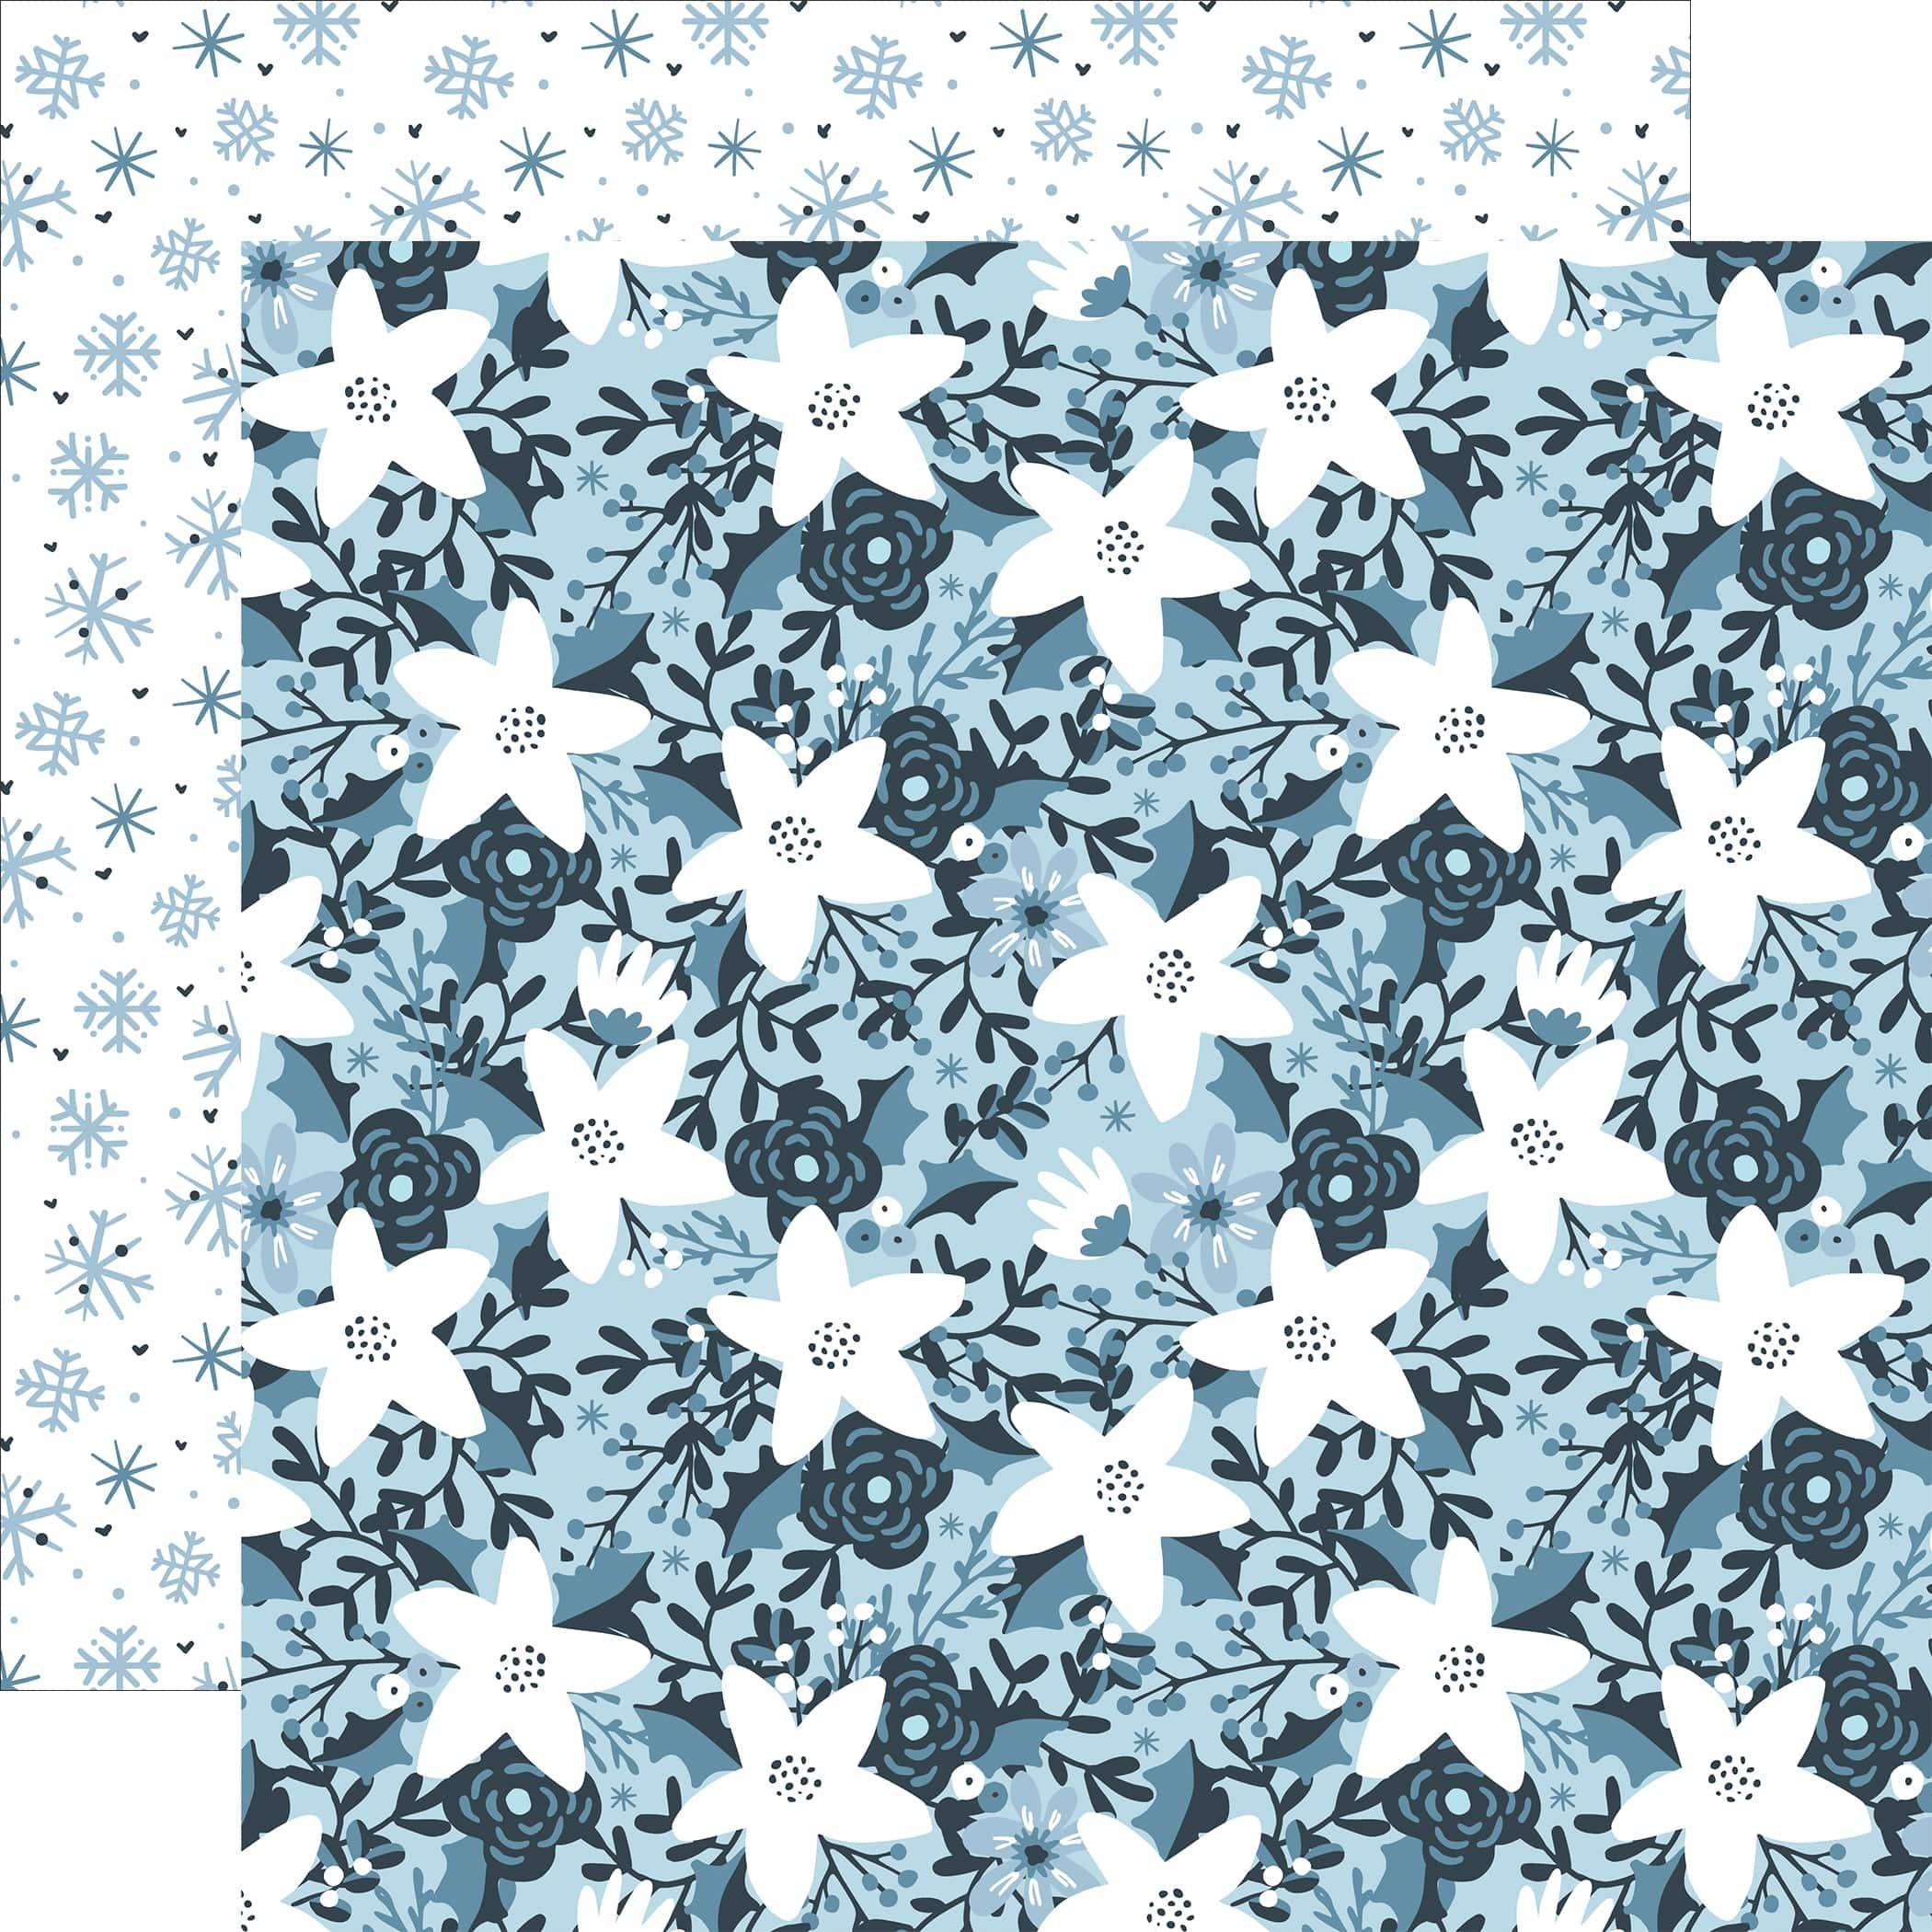 The Magic of Winter Collection Frosted Flowers 12 x 12 Double-Sided  Scrapbook Paper by Echo Park Paper